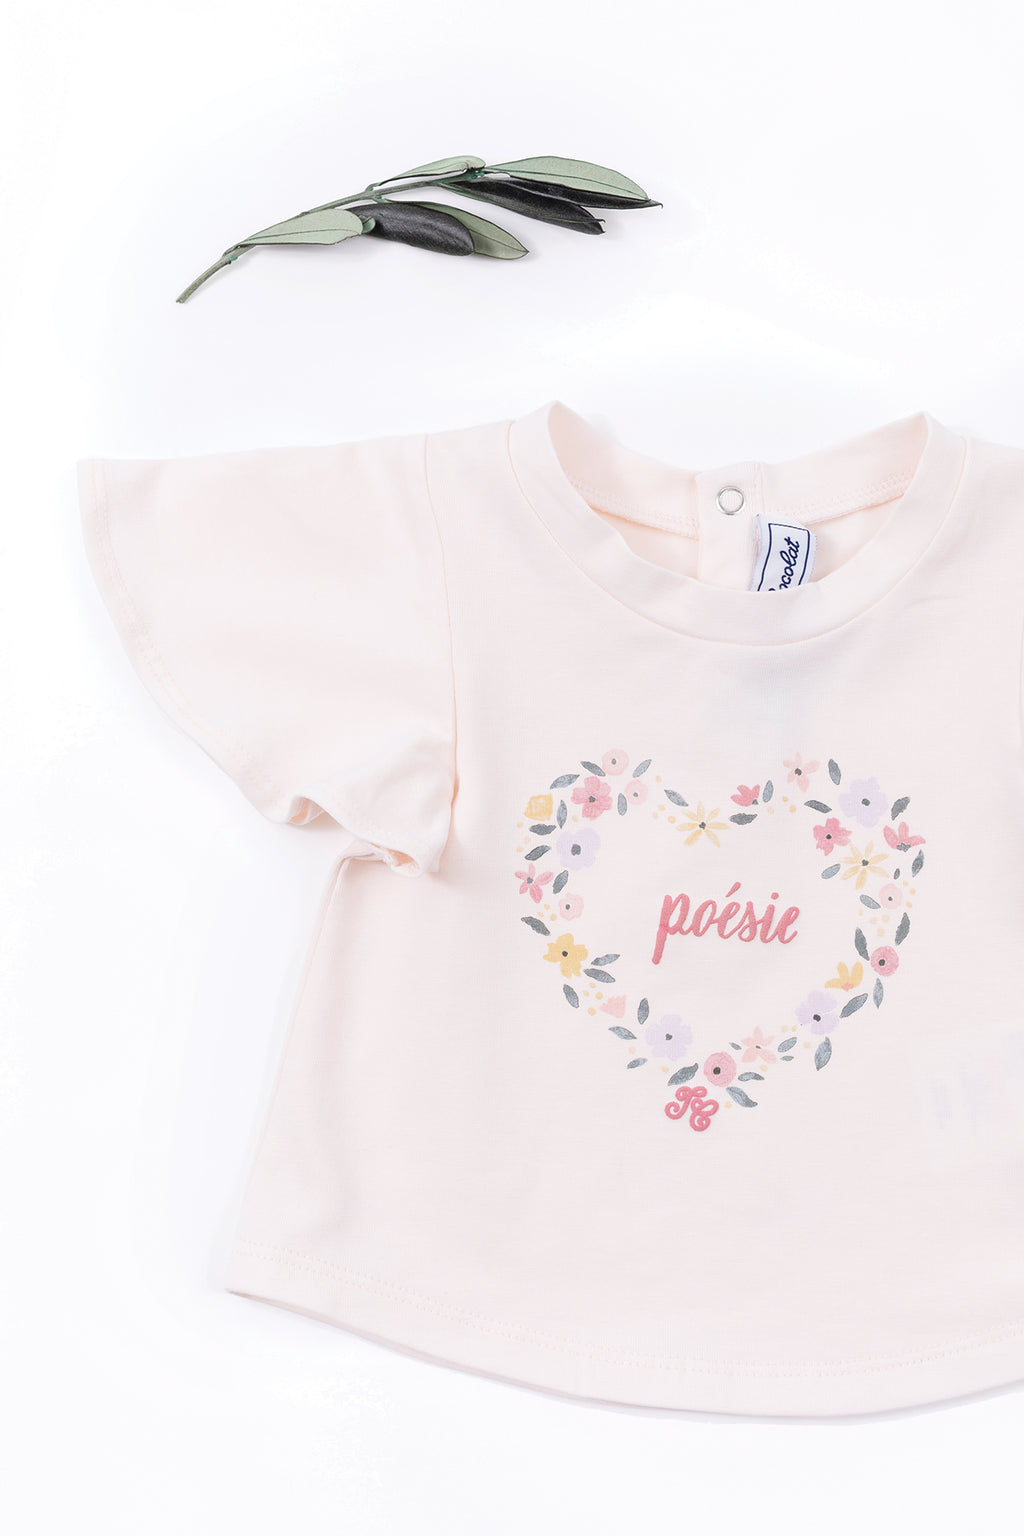 T-shirt - Pale pink  Illustration poetry